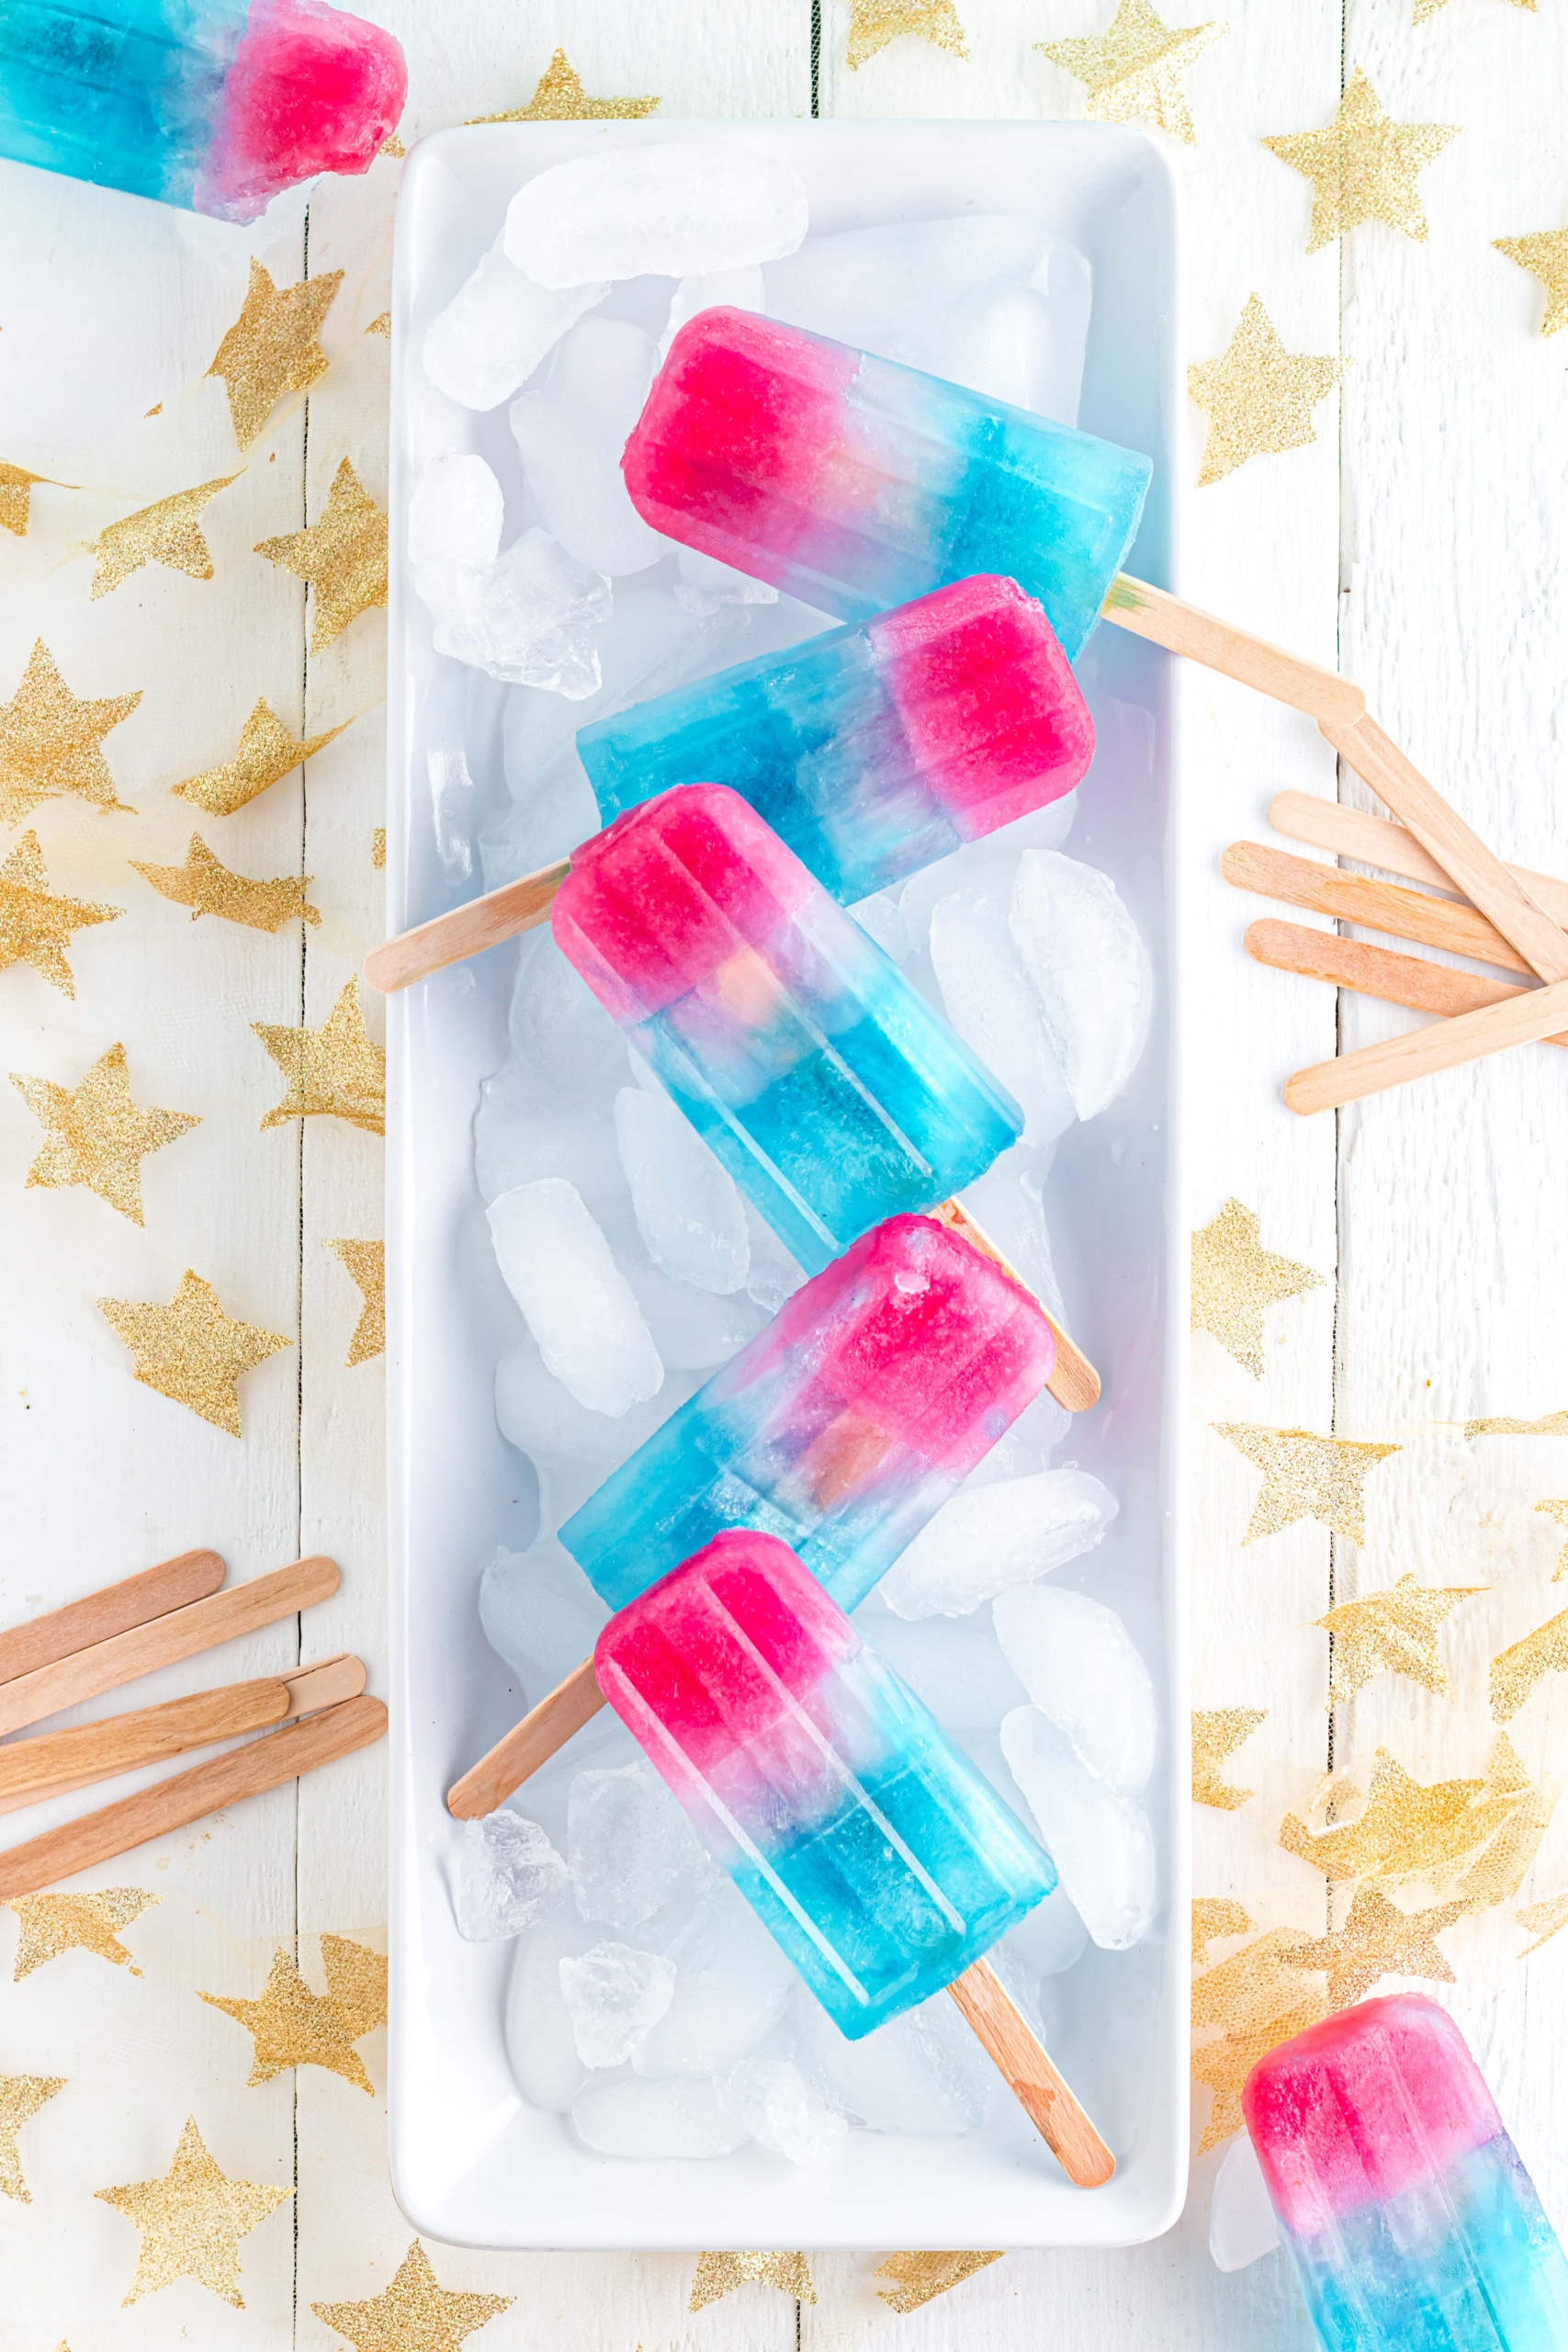 Photo of Completed popsicles laying in ice